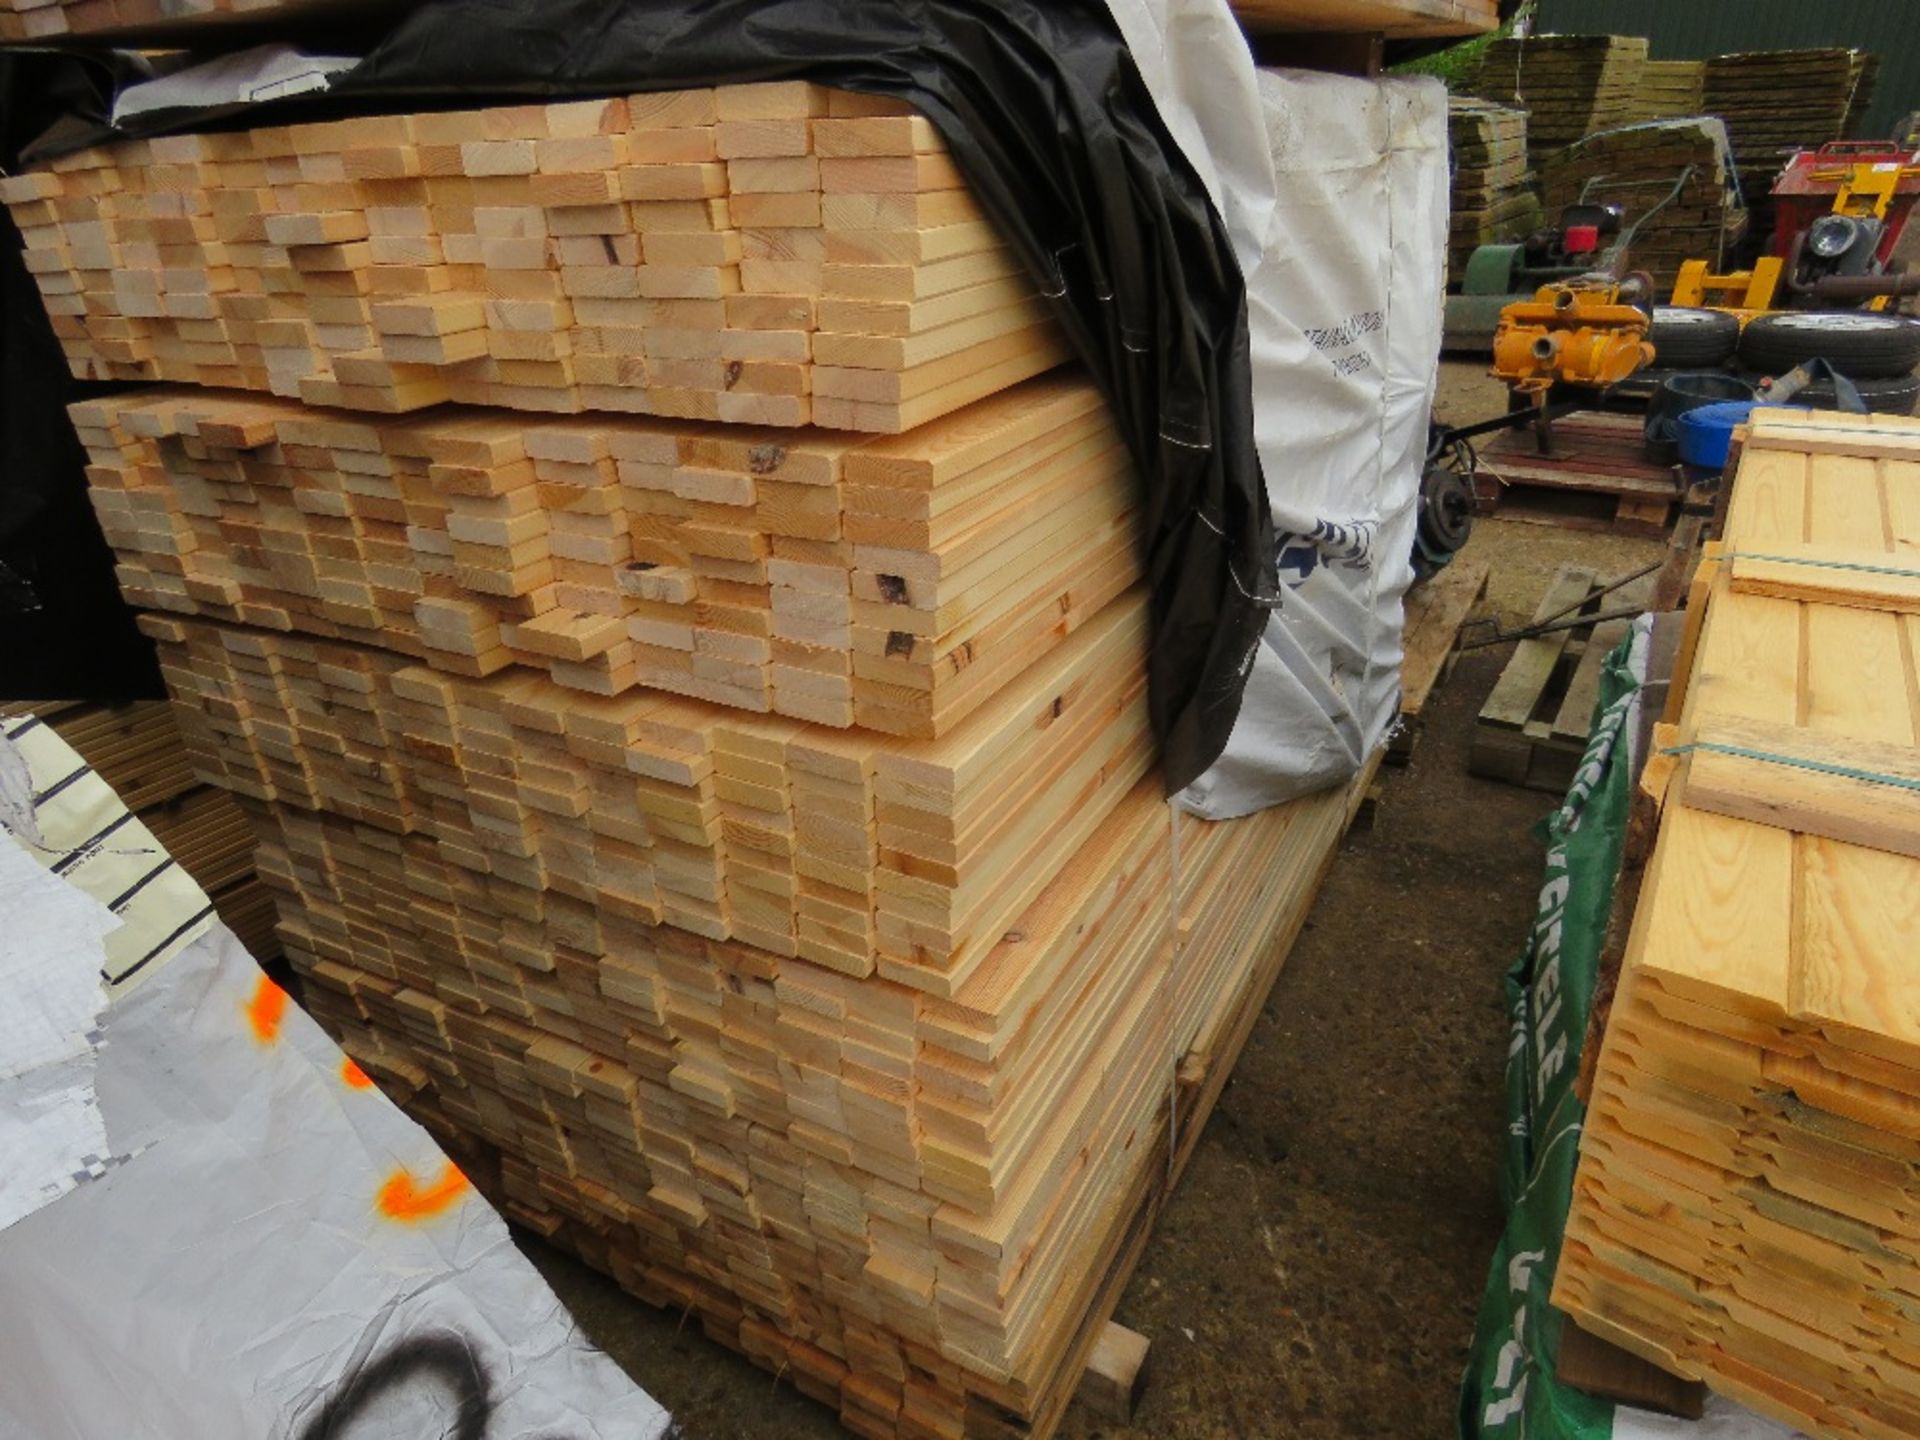 EXTRA LARGE PACK OF MACHINED TIMBER SLATS / BOARDS, UNTREATED. 1.83M LENGTH X 70MM WIDTH X 20MM DEPT